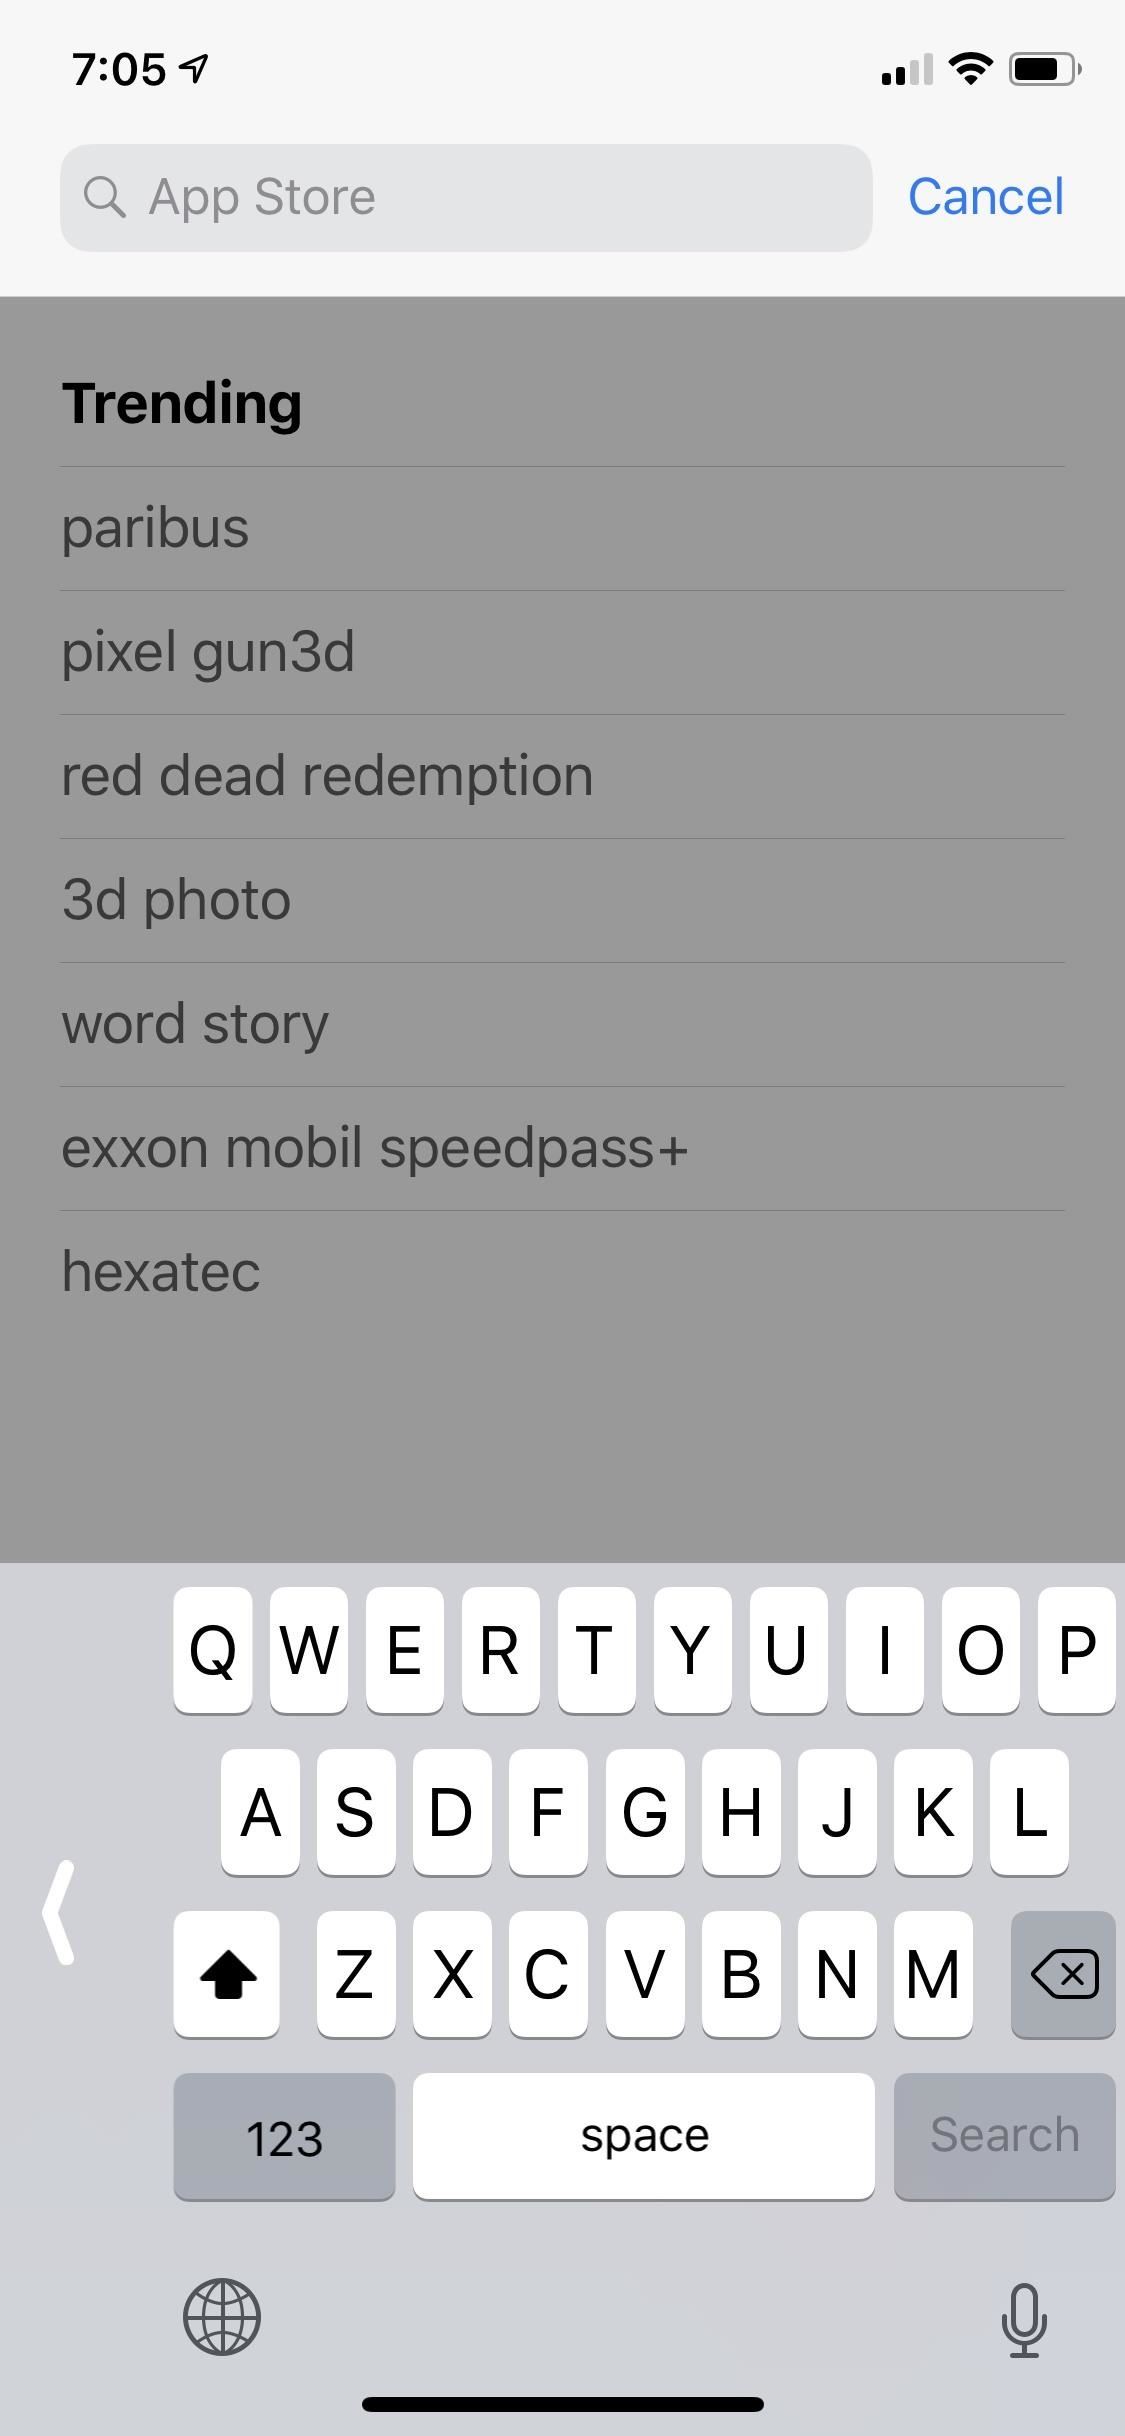 How to Enable One-Handed Typing on Your iPhone's Stock Keyboard